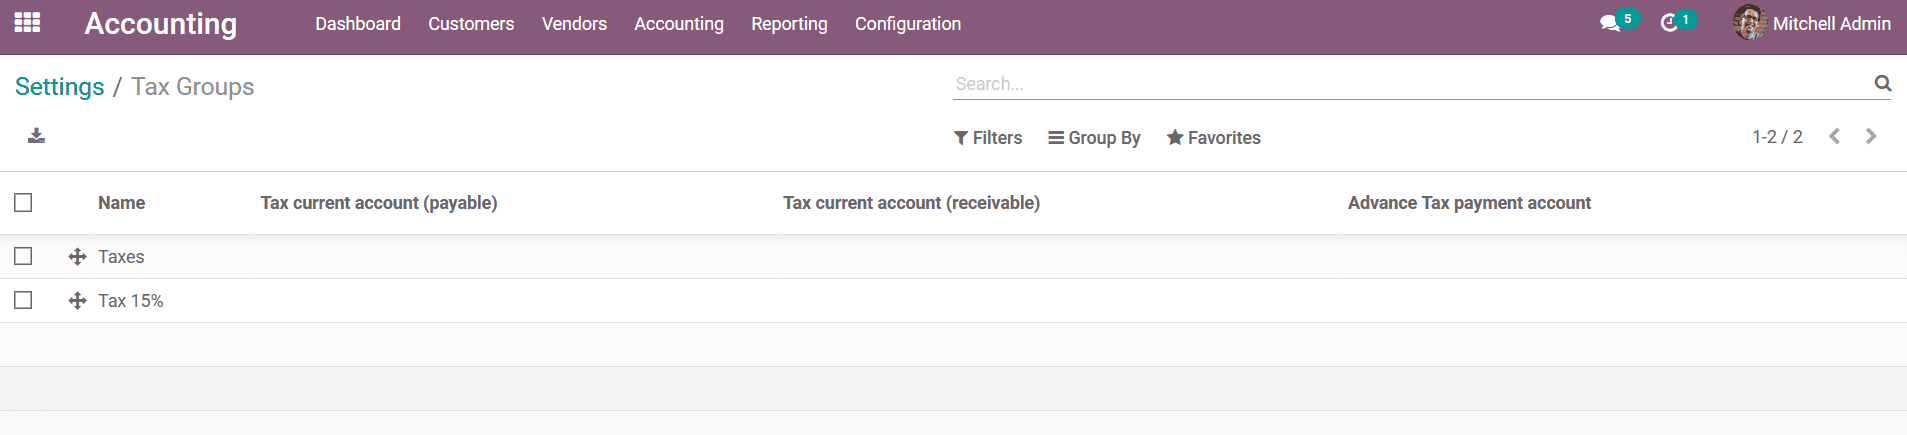 Configurable Options in the Accounting Module